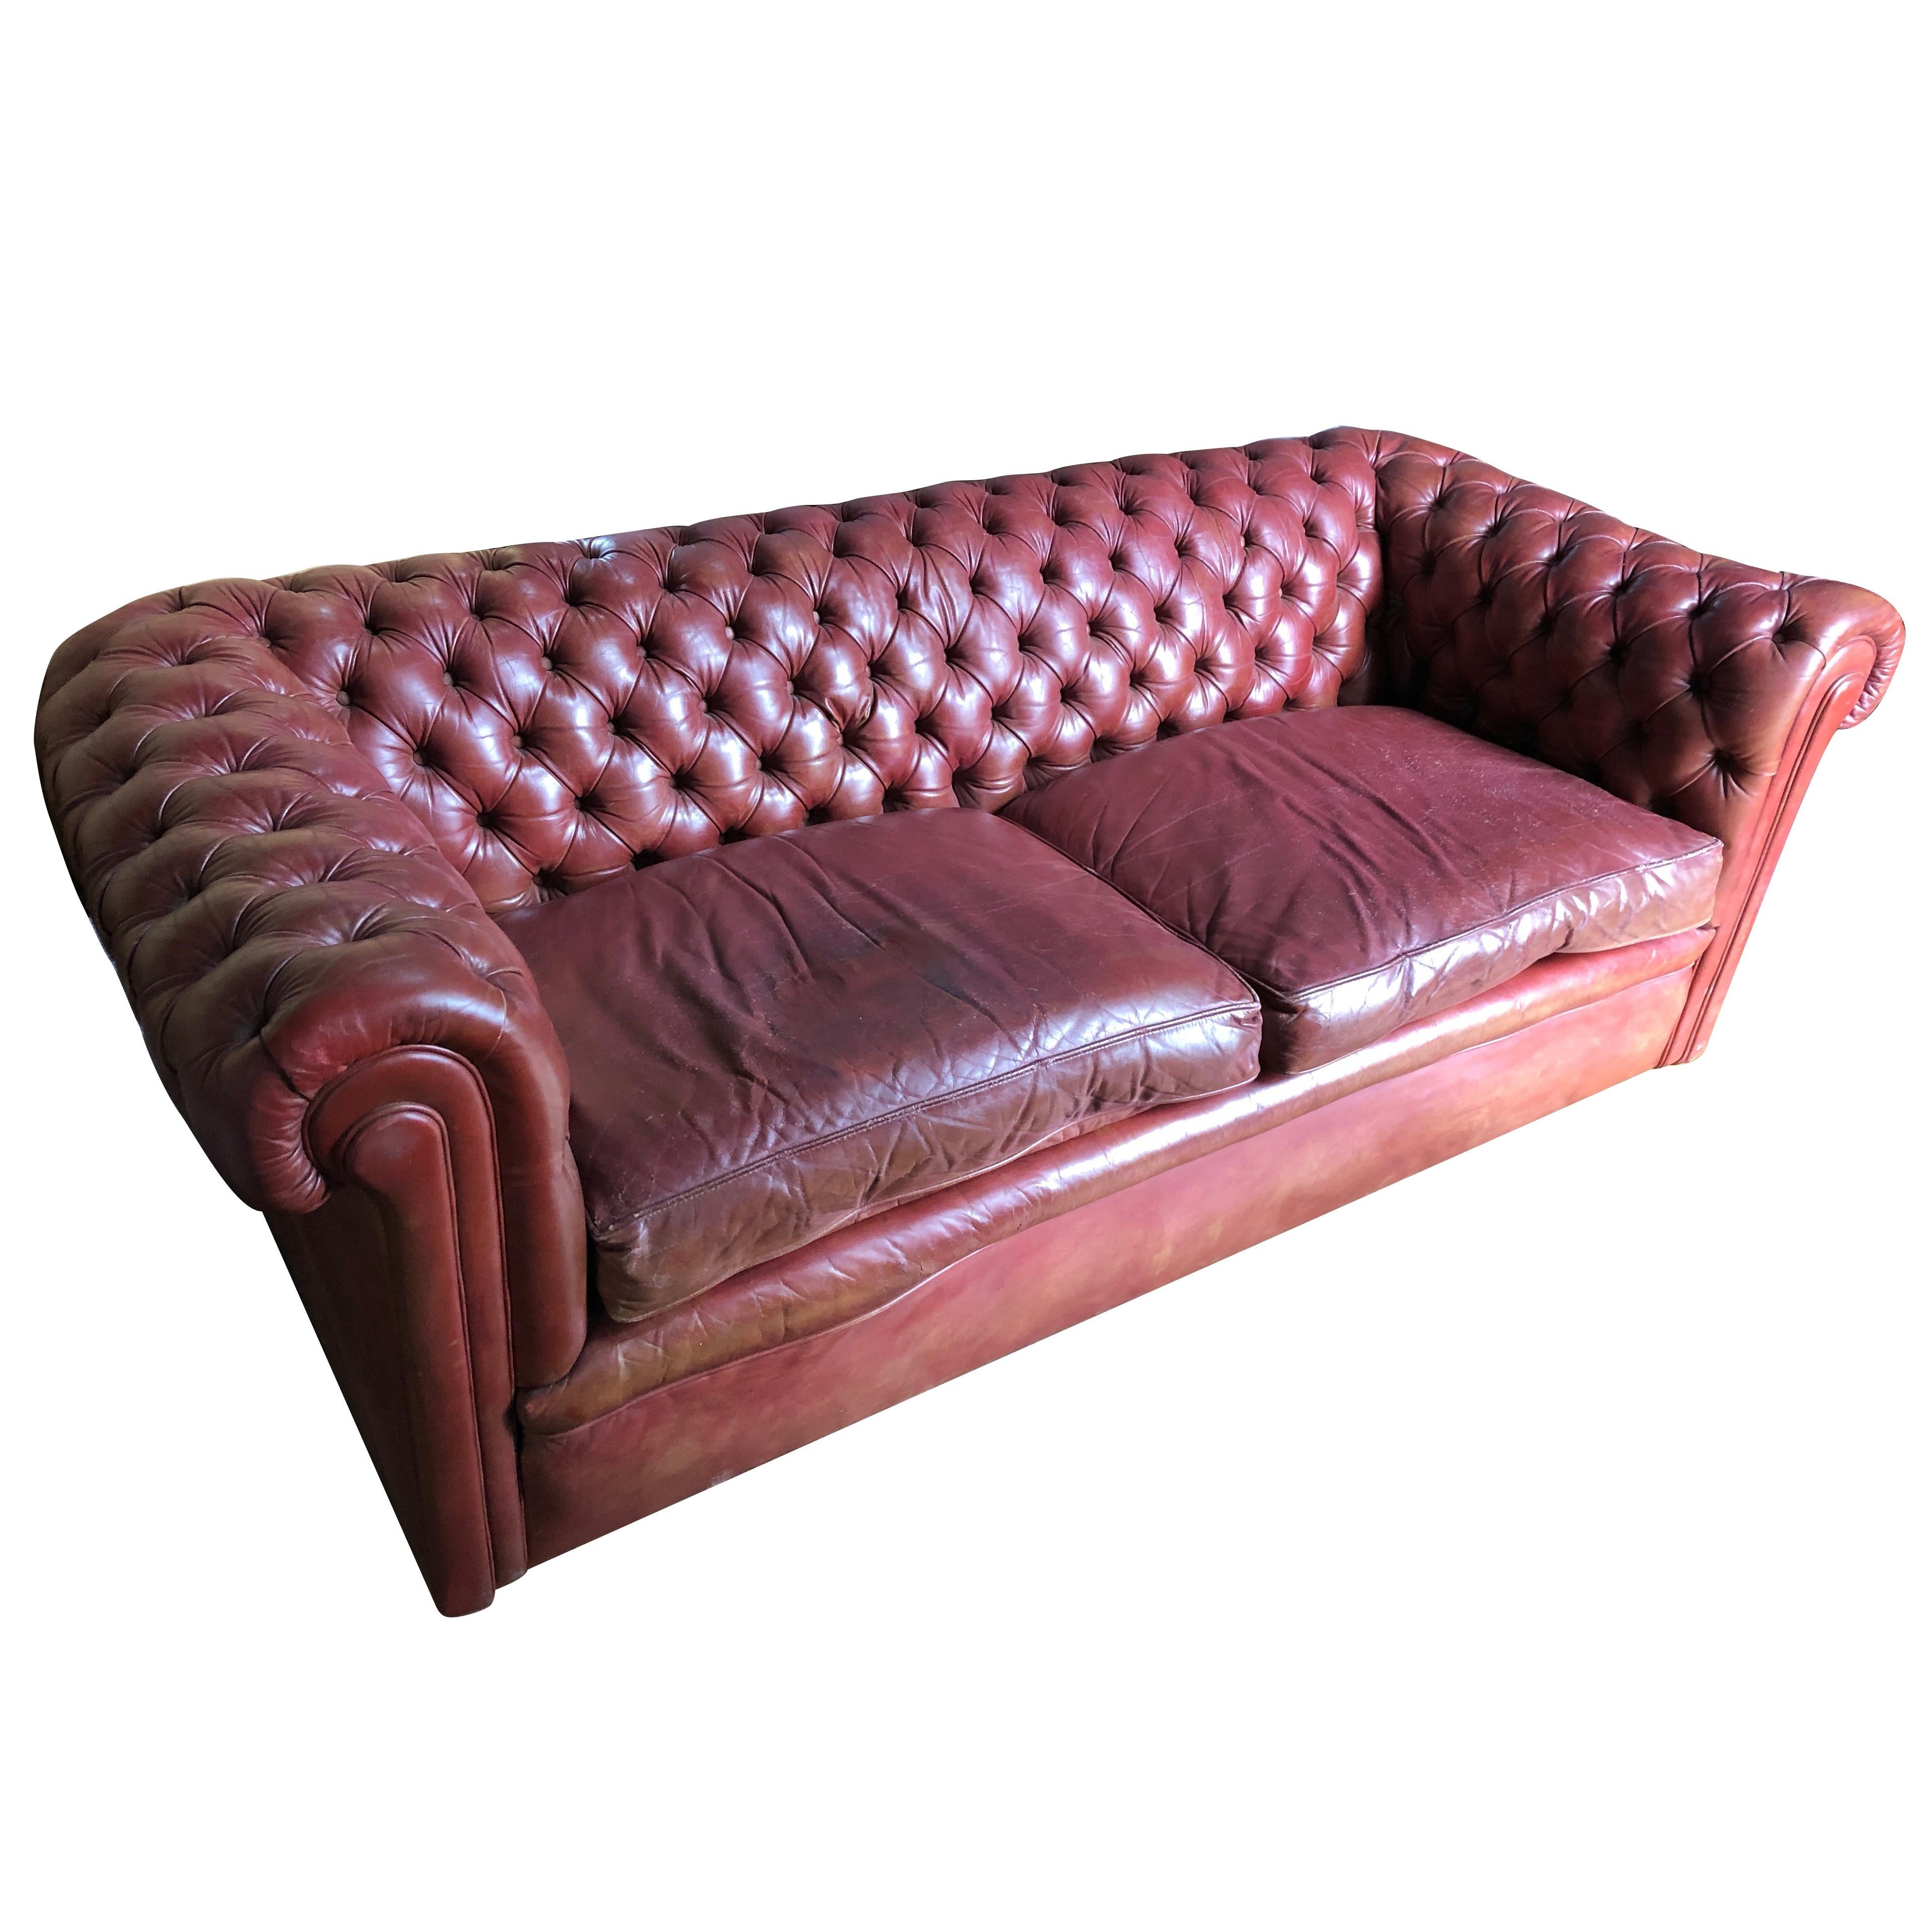 Incredibly Handsome Distressed Tufted English Leather Chesterfield Sofa